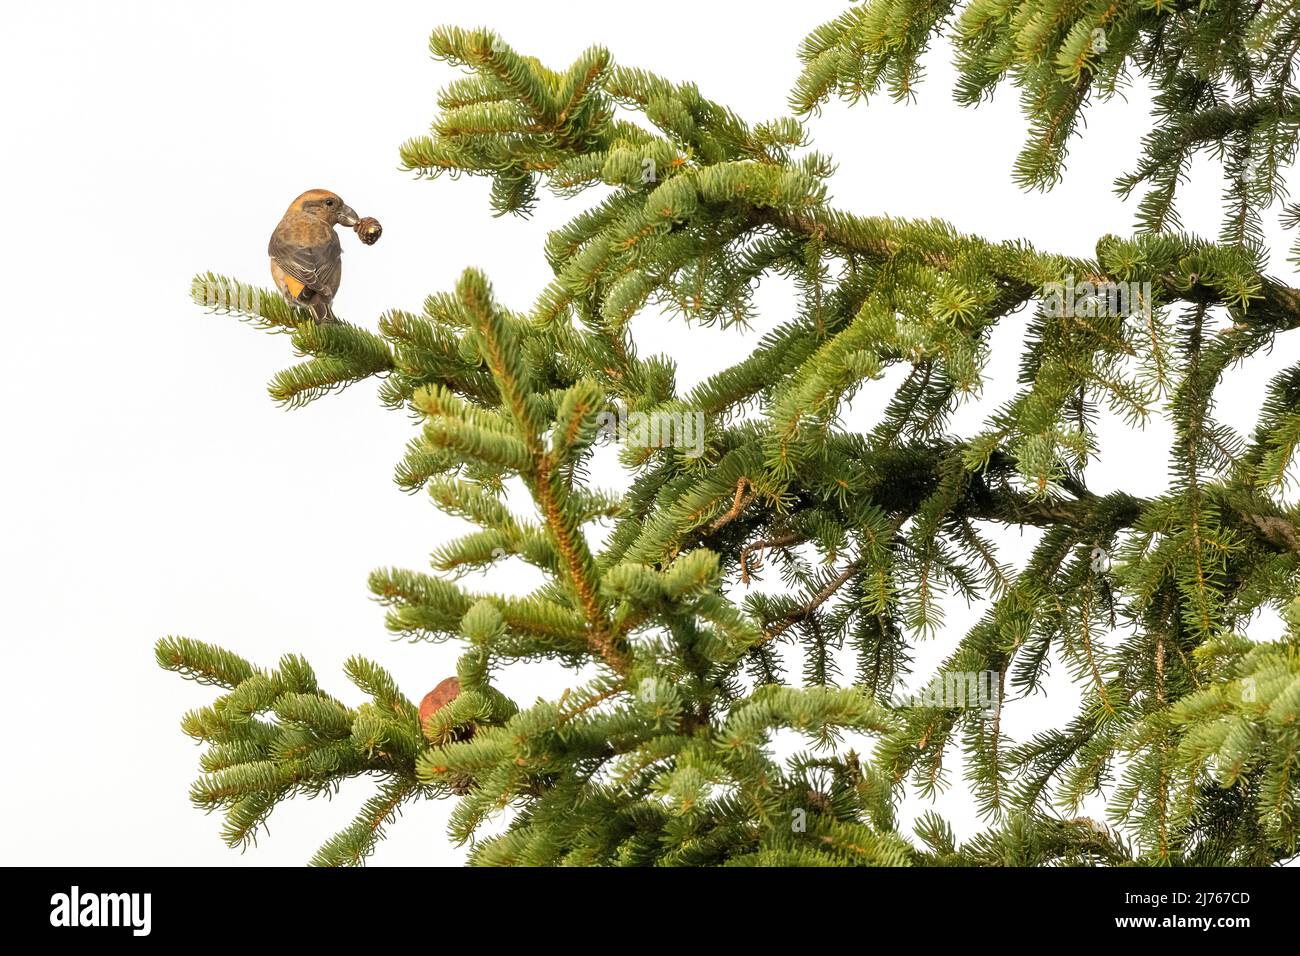 Crossbill feeding in conifer tree against white background due to high fog Stock Photo